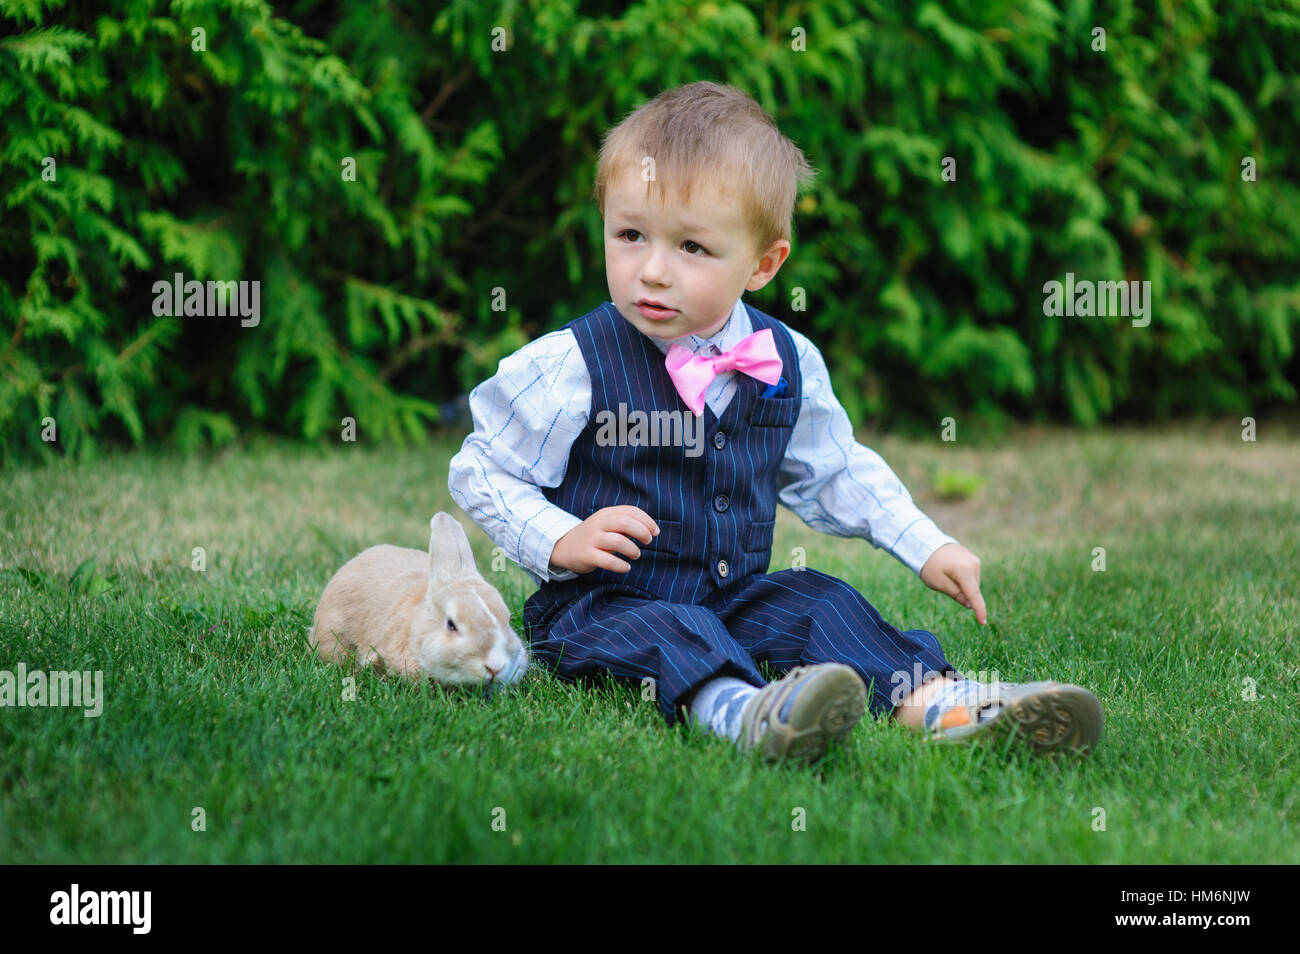 little boy sitting on the grass with a rabbit Stock Photo